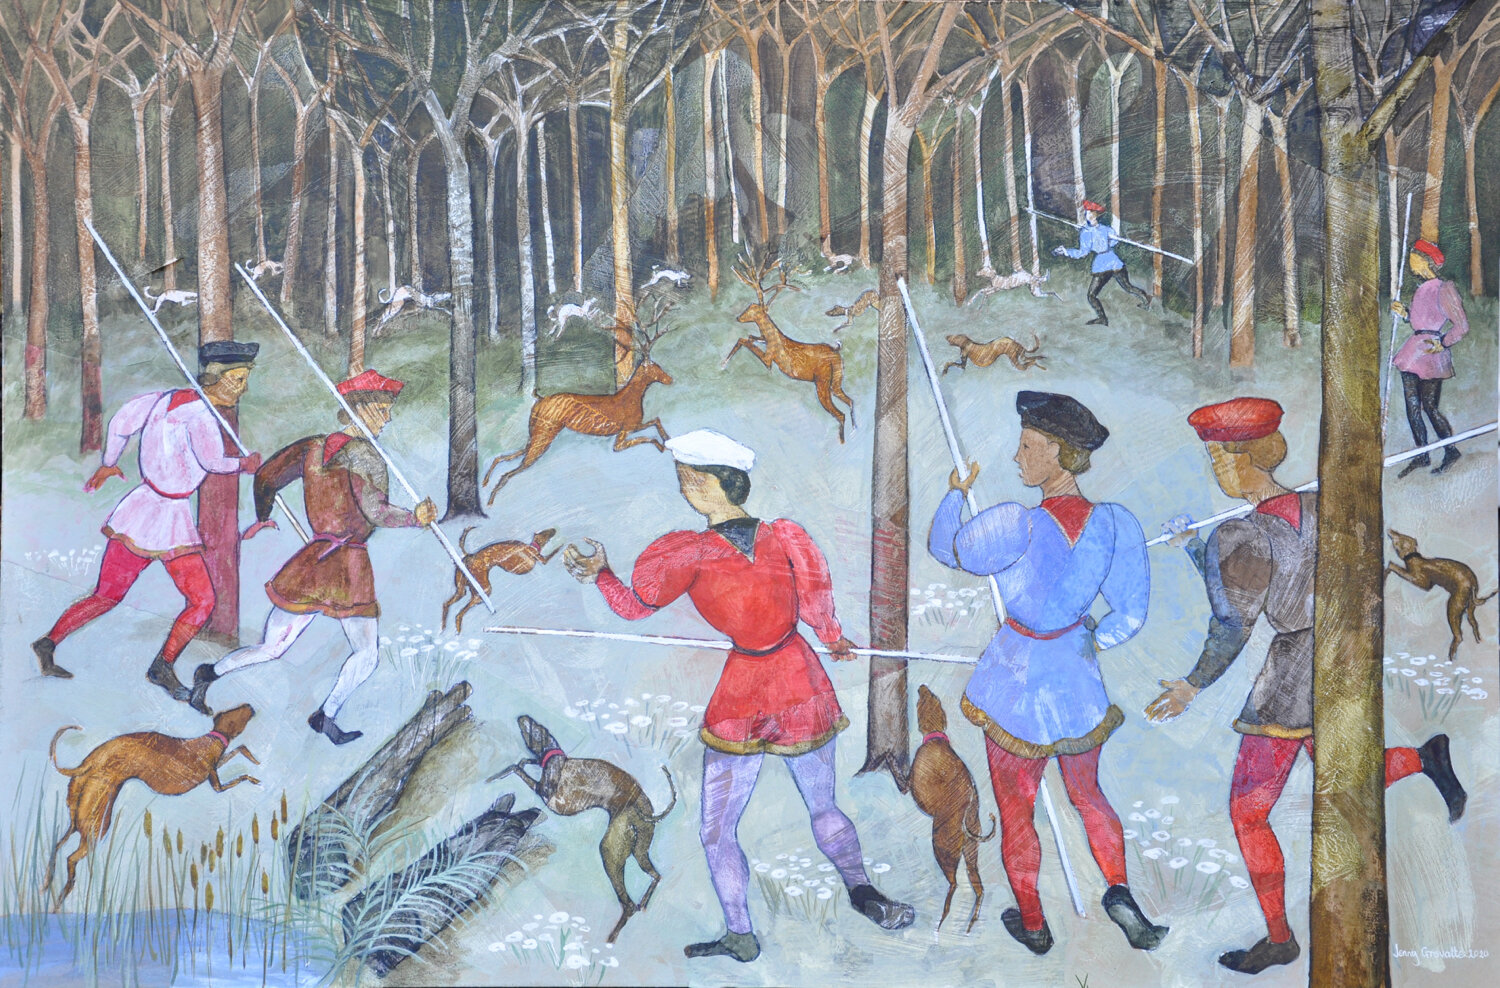 Tribute to Uccello's "Hunt in the Forest"